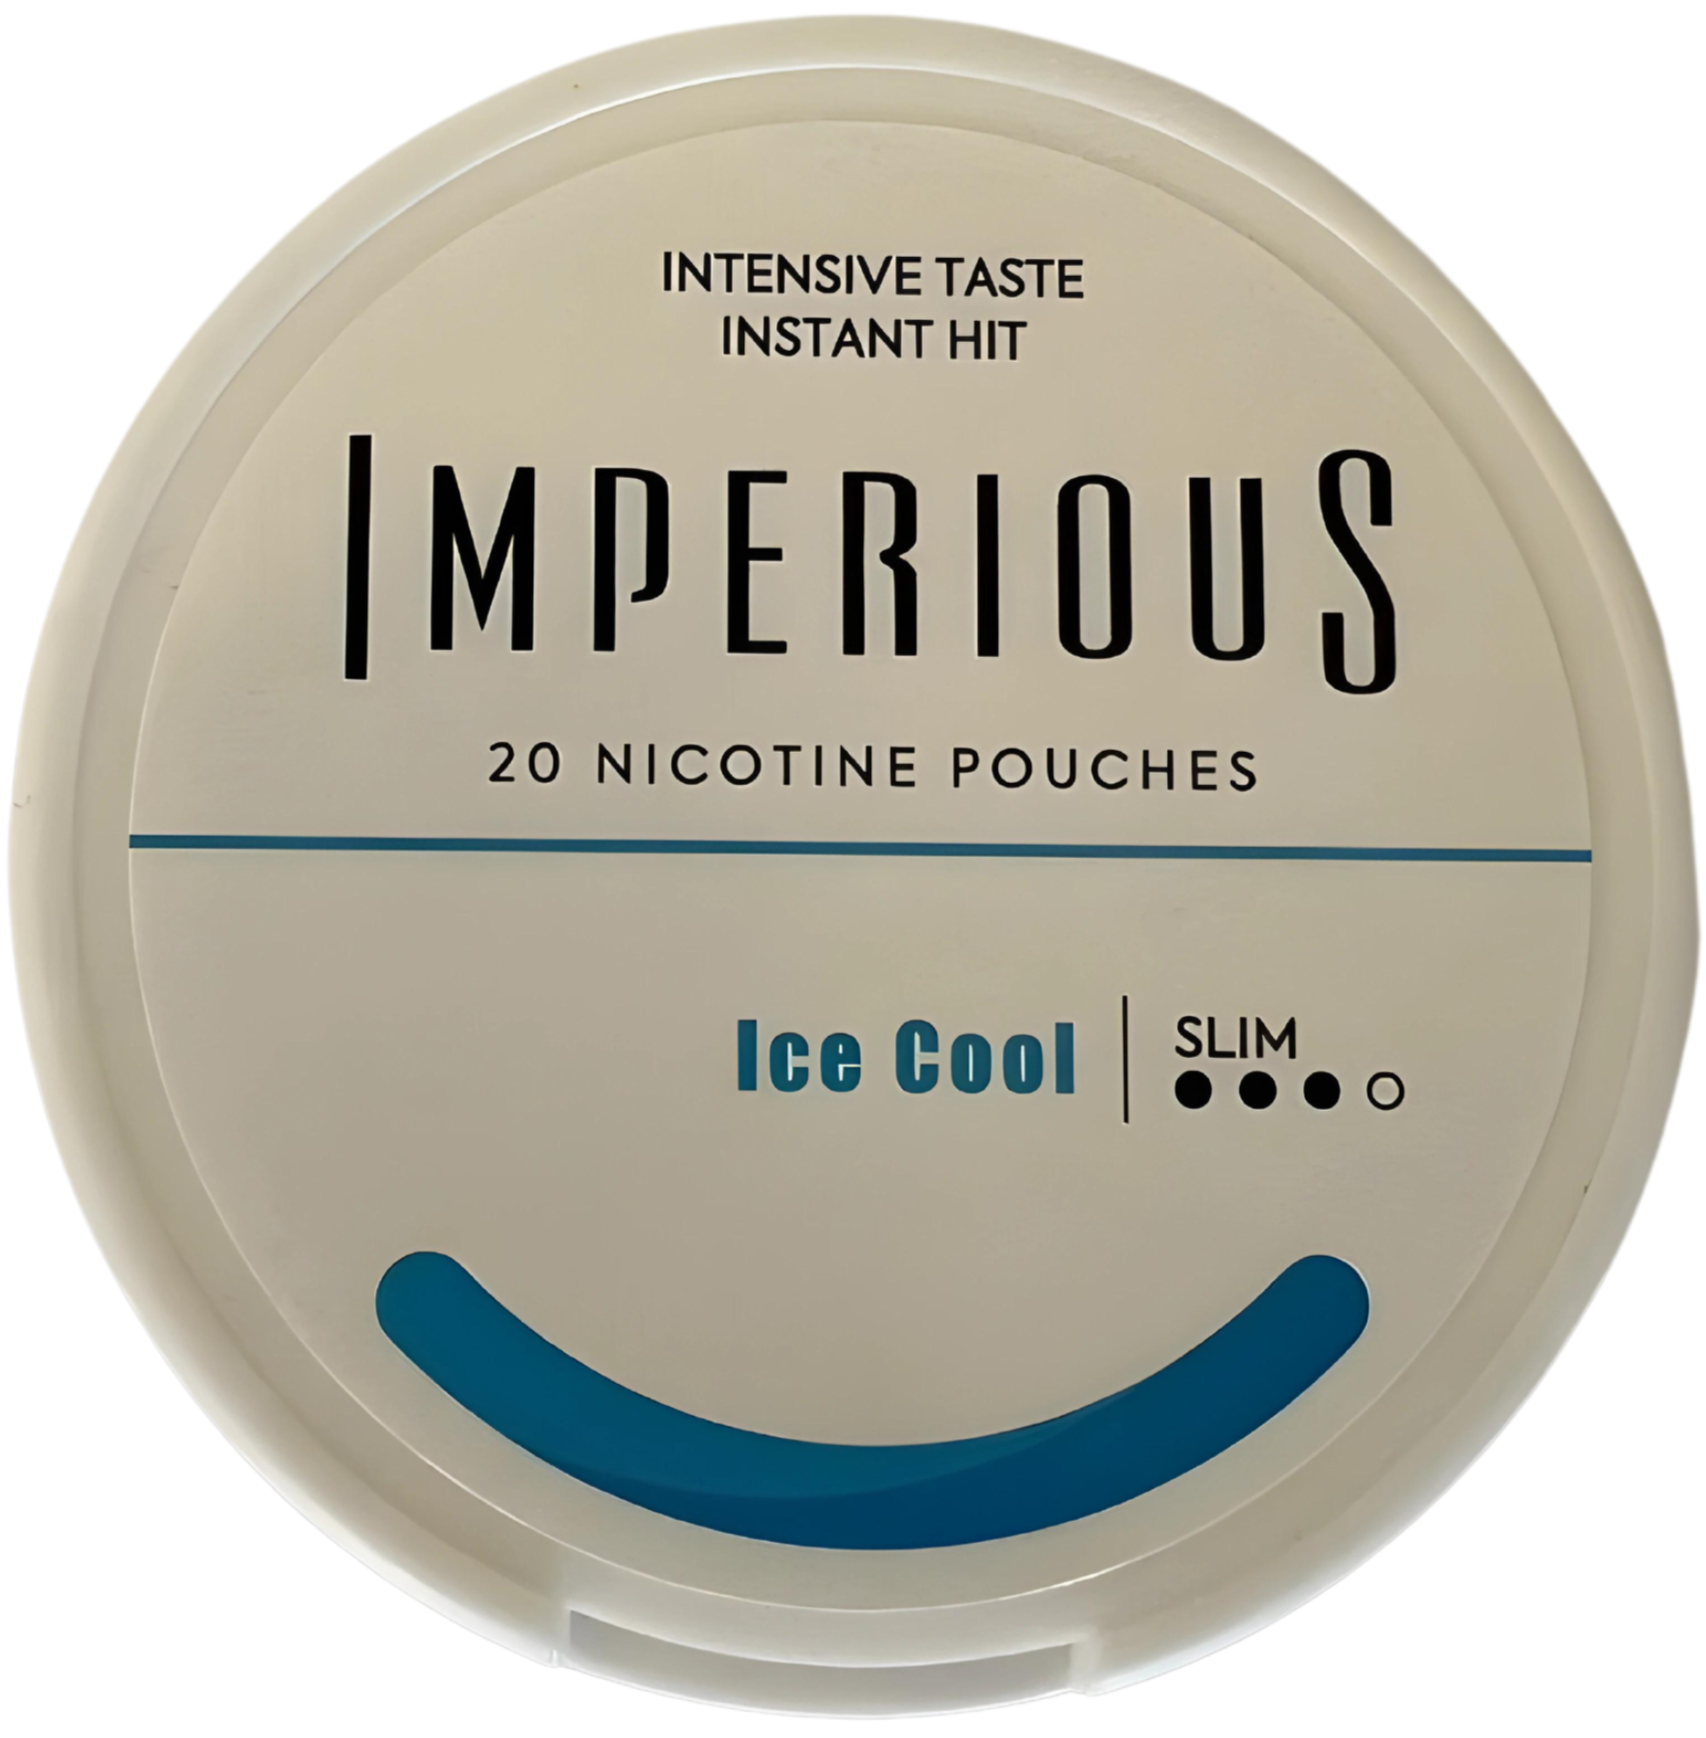 Imperious Ice Cool - 14mg/g